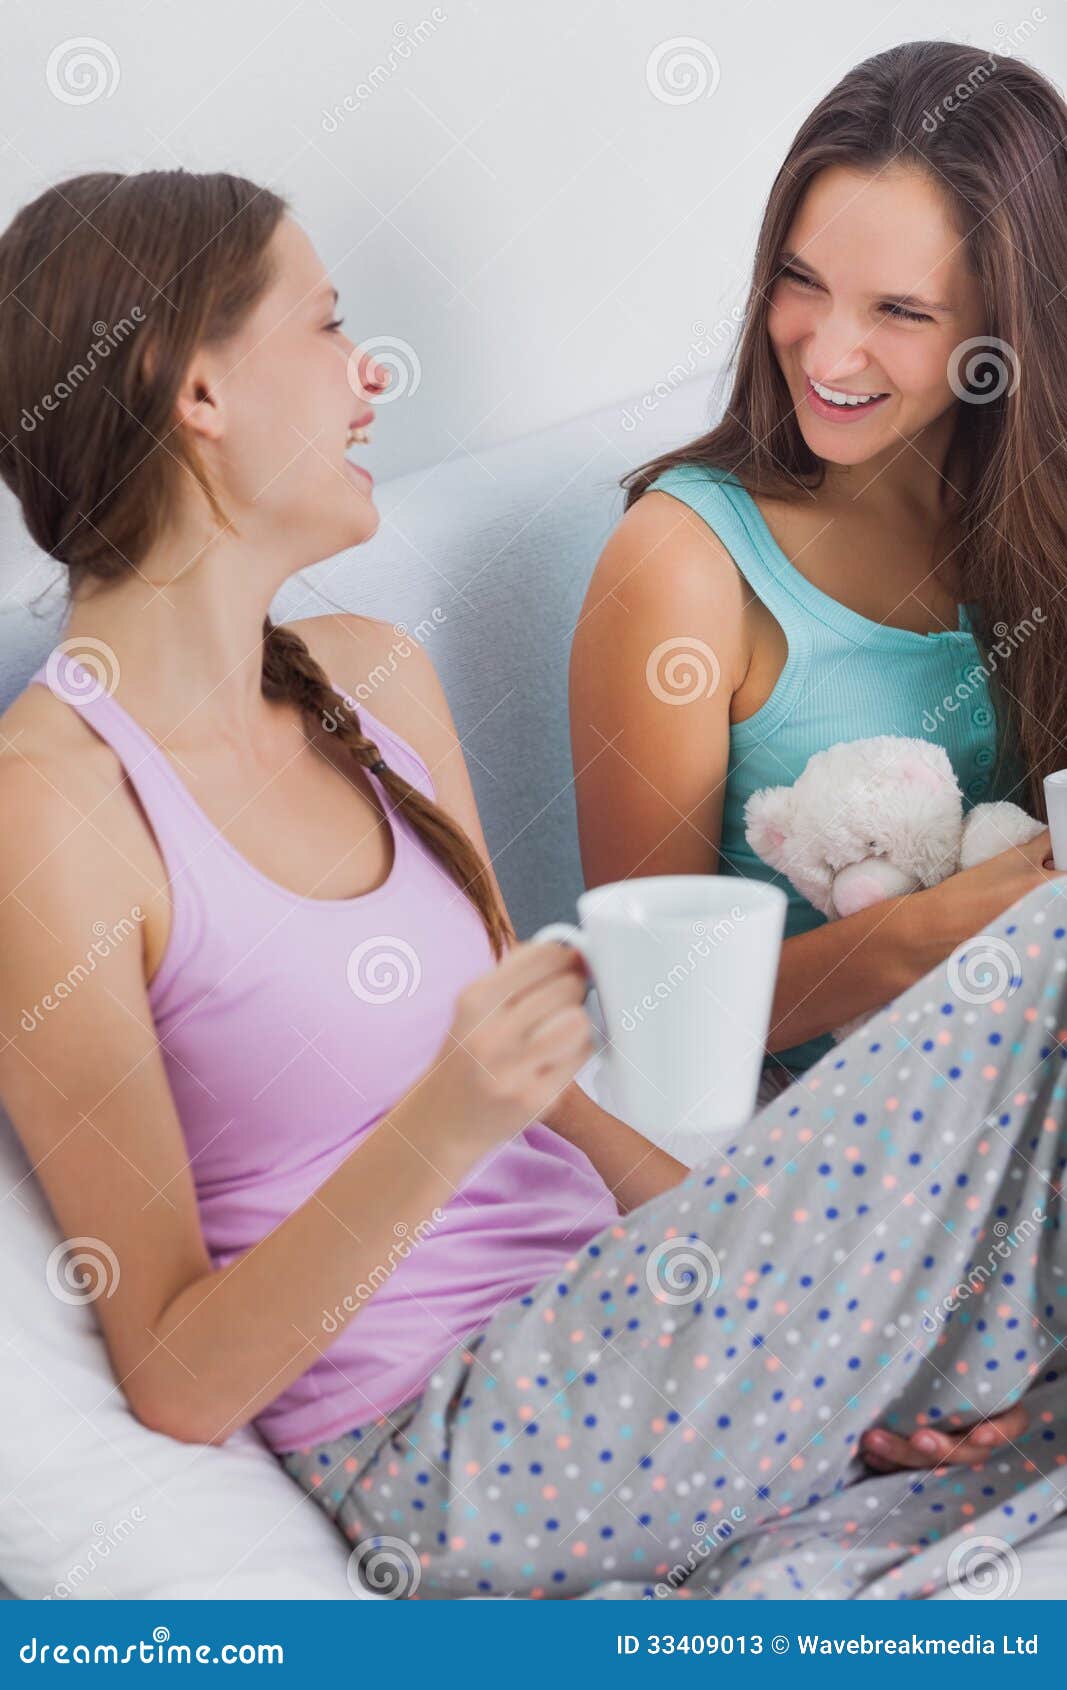 Two Girls Sitting On Bed Stock Image Image Of Friend 33409013